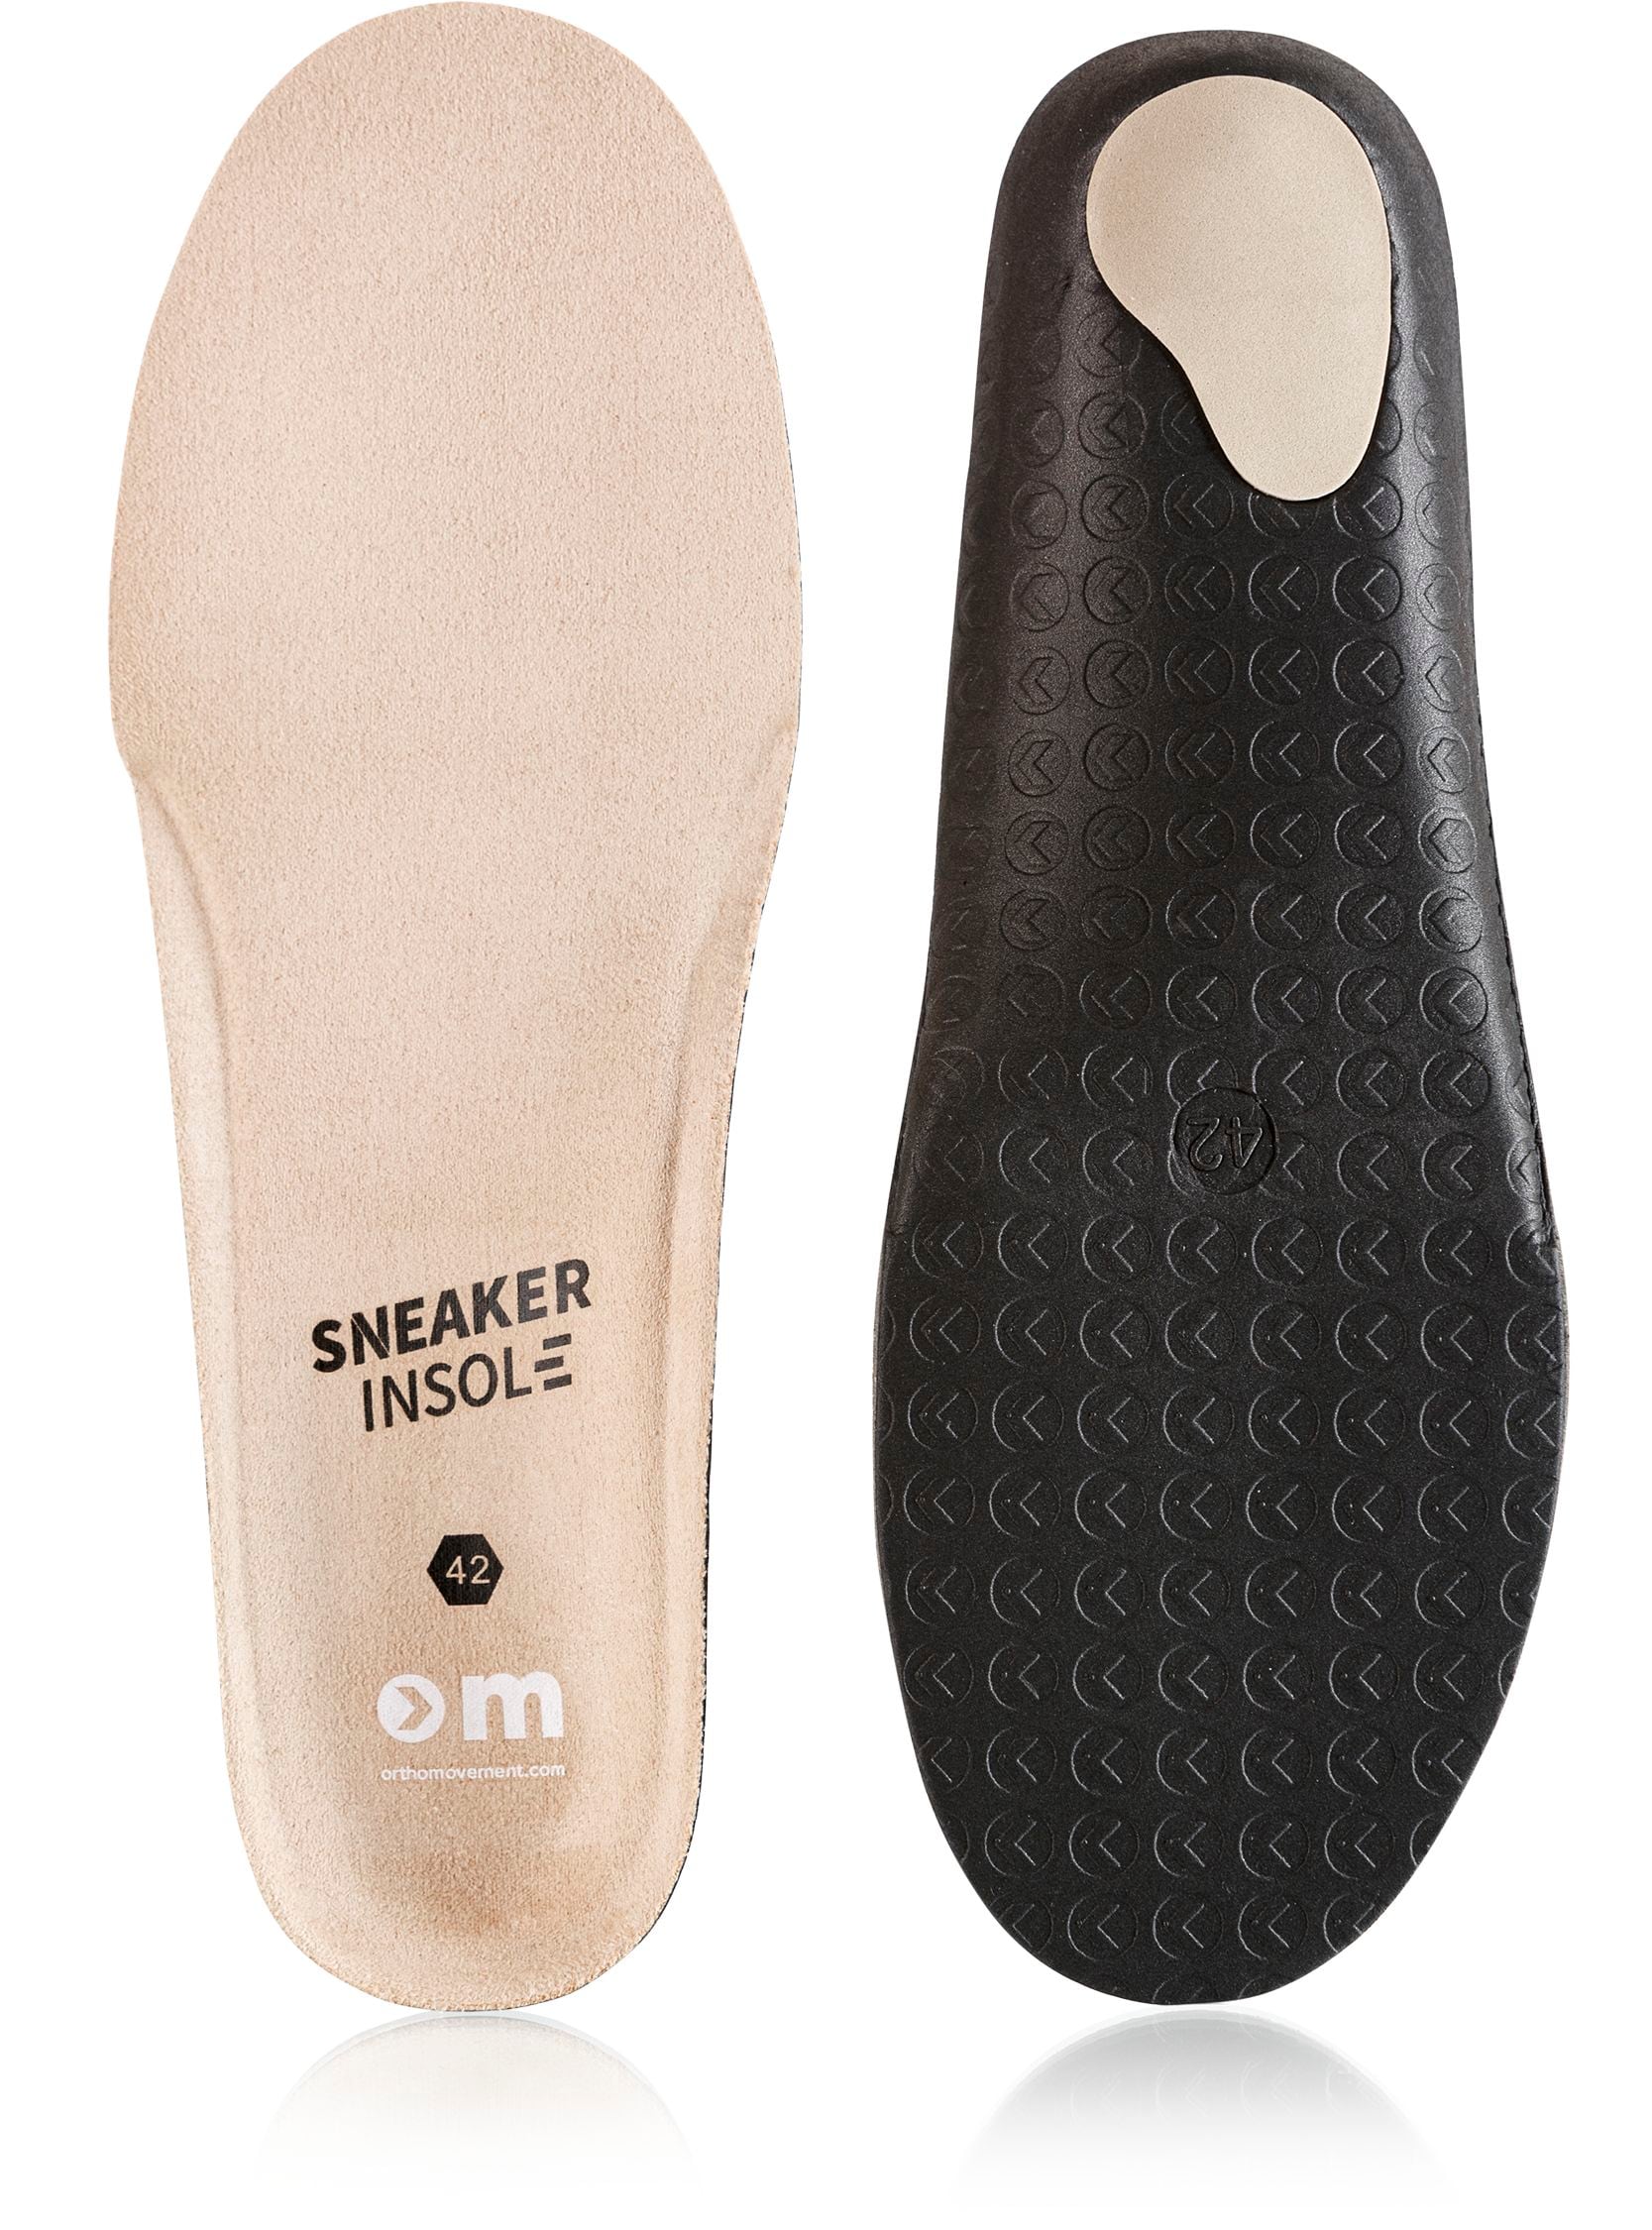 ORTHO MOVEMENT, SNEAKER INSOLE